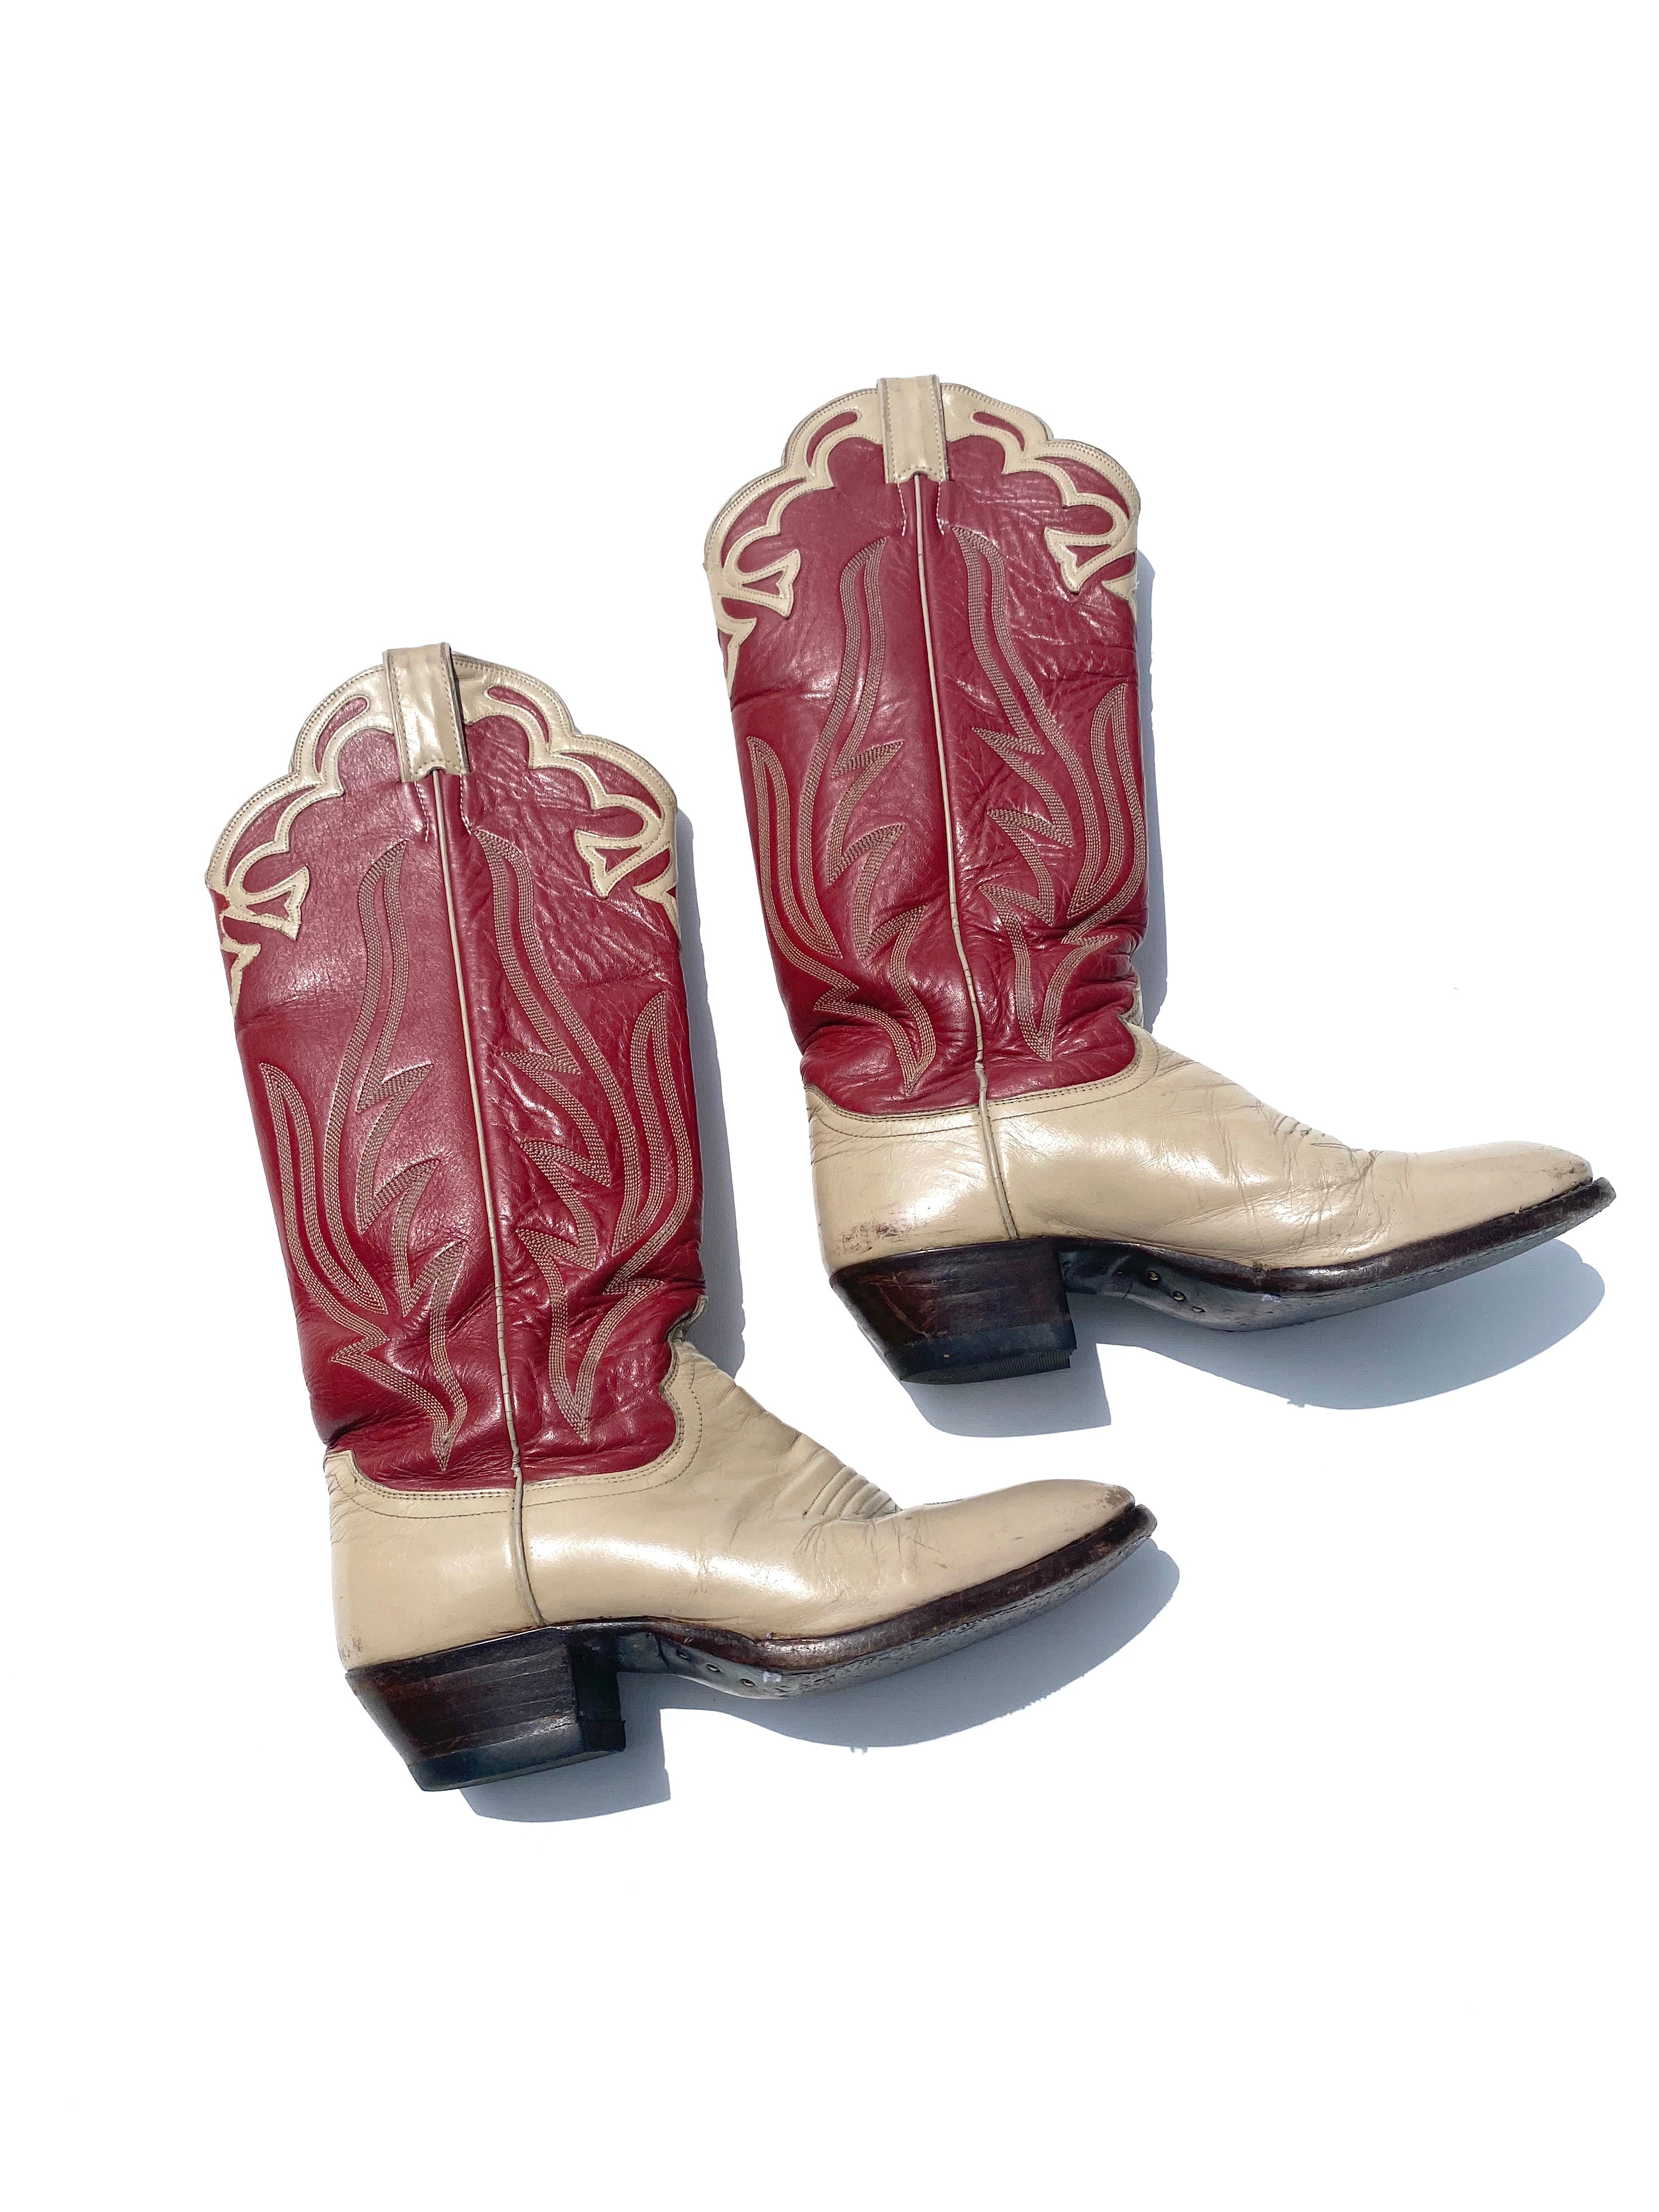 Vintage Western Boots - Red & Tan